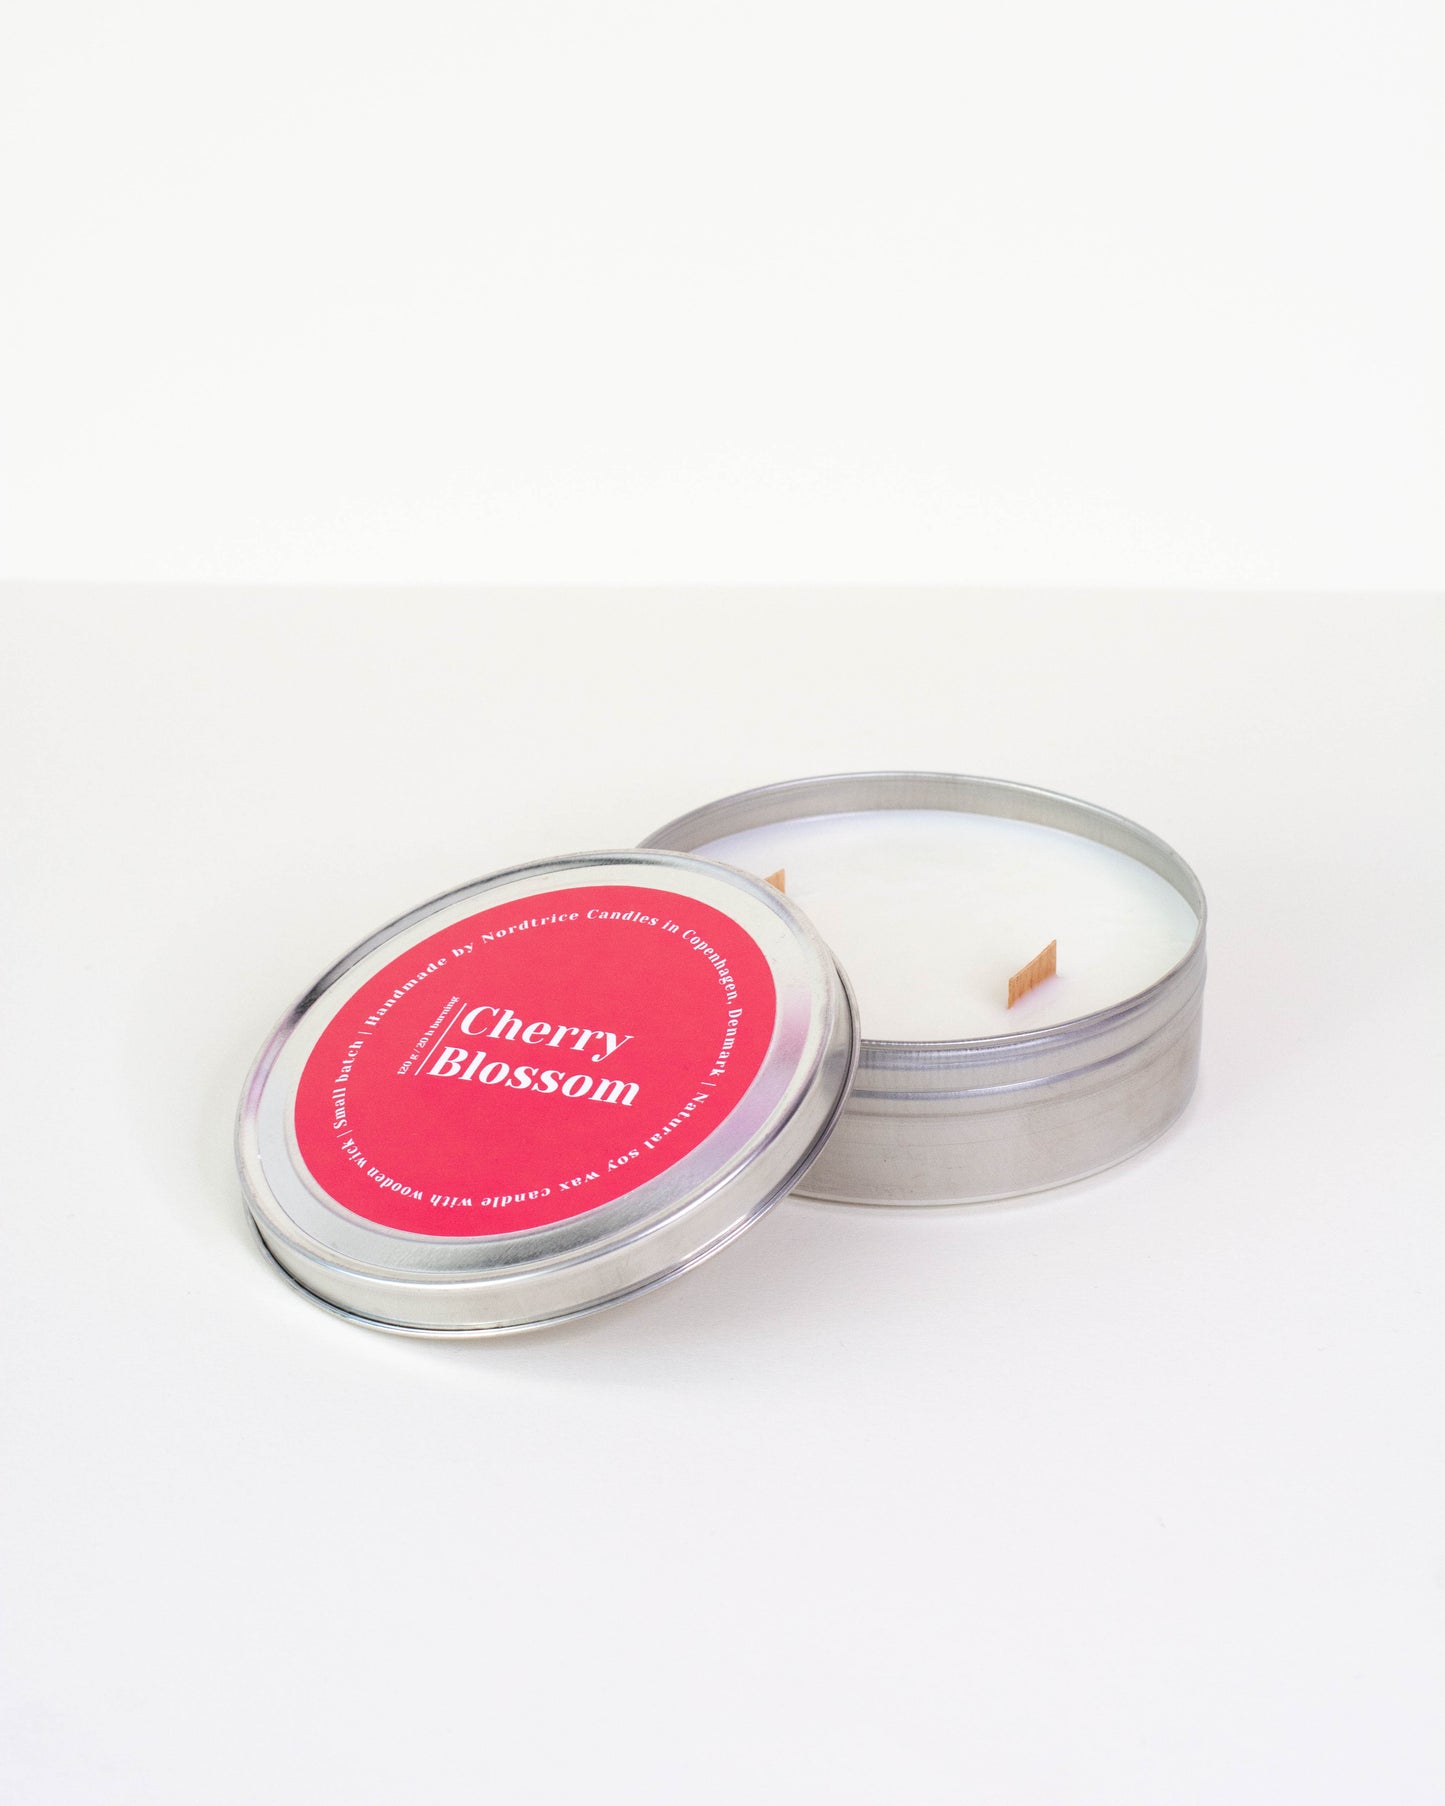 Soy Scented Candle, Cherry Blossom M/L size